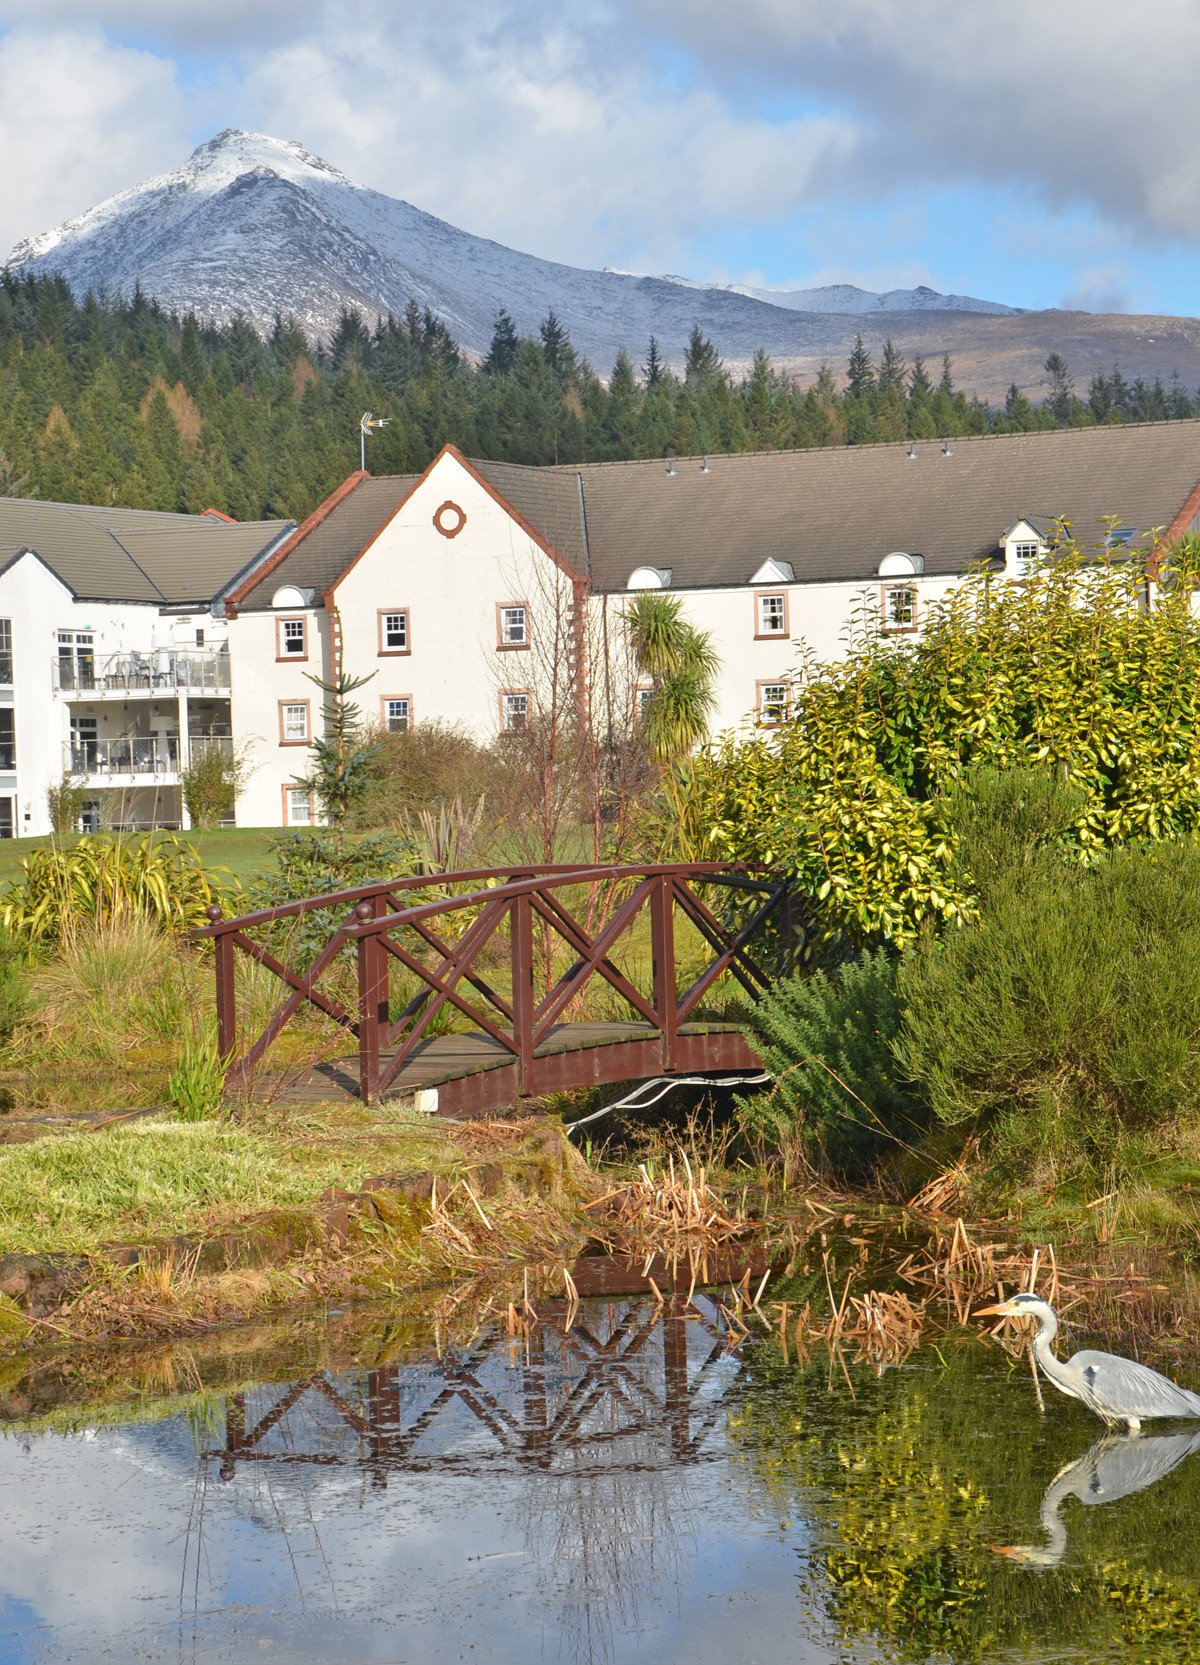 Goat Fell, with Auchrannie Resort, Arran, in the foreground